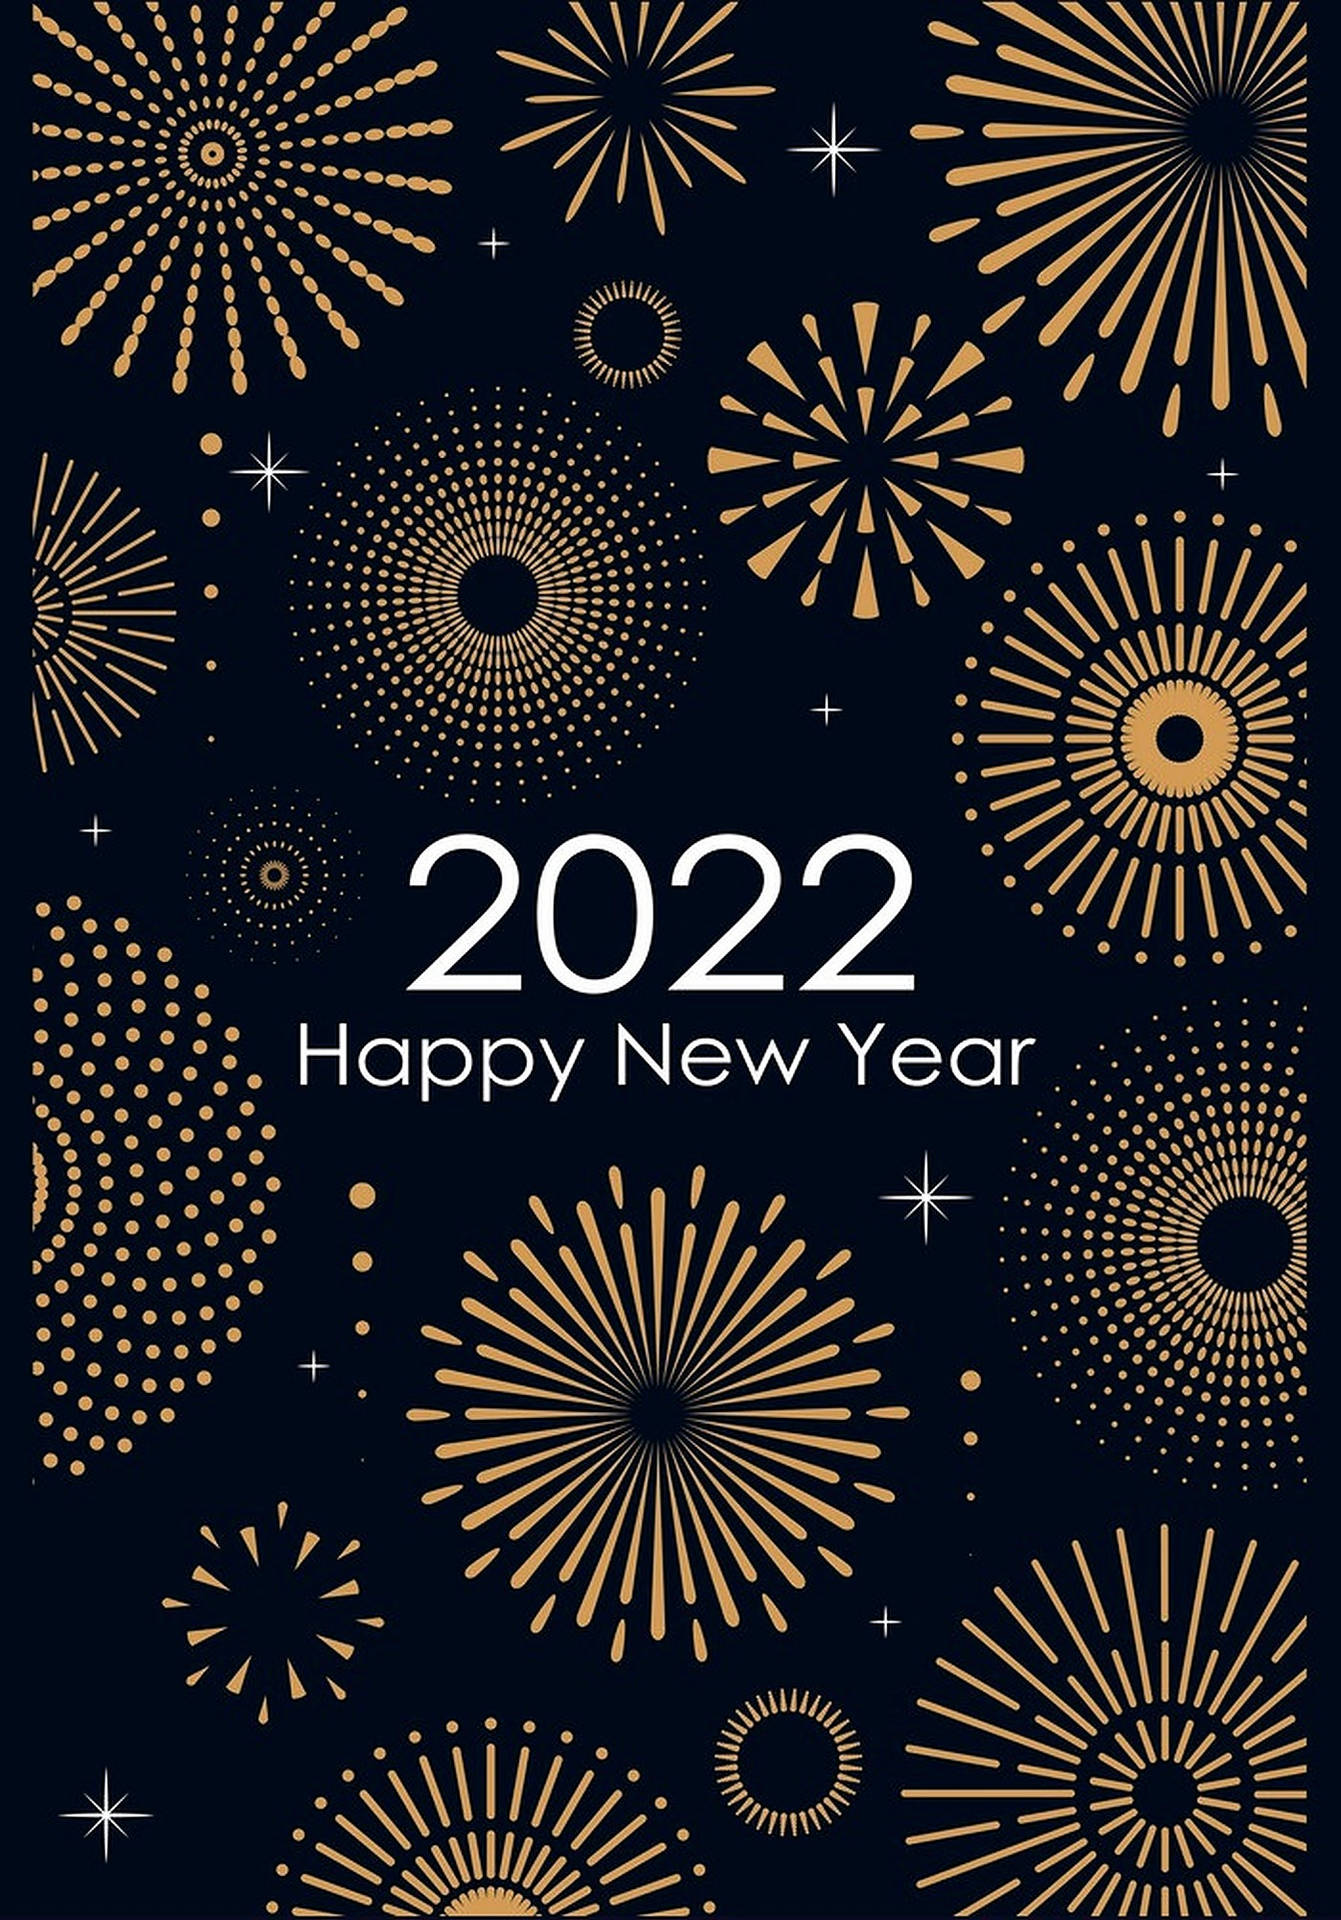 Welcoming New Year 2022 With a Bang! Wallpaper